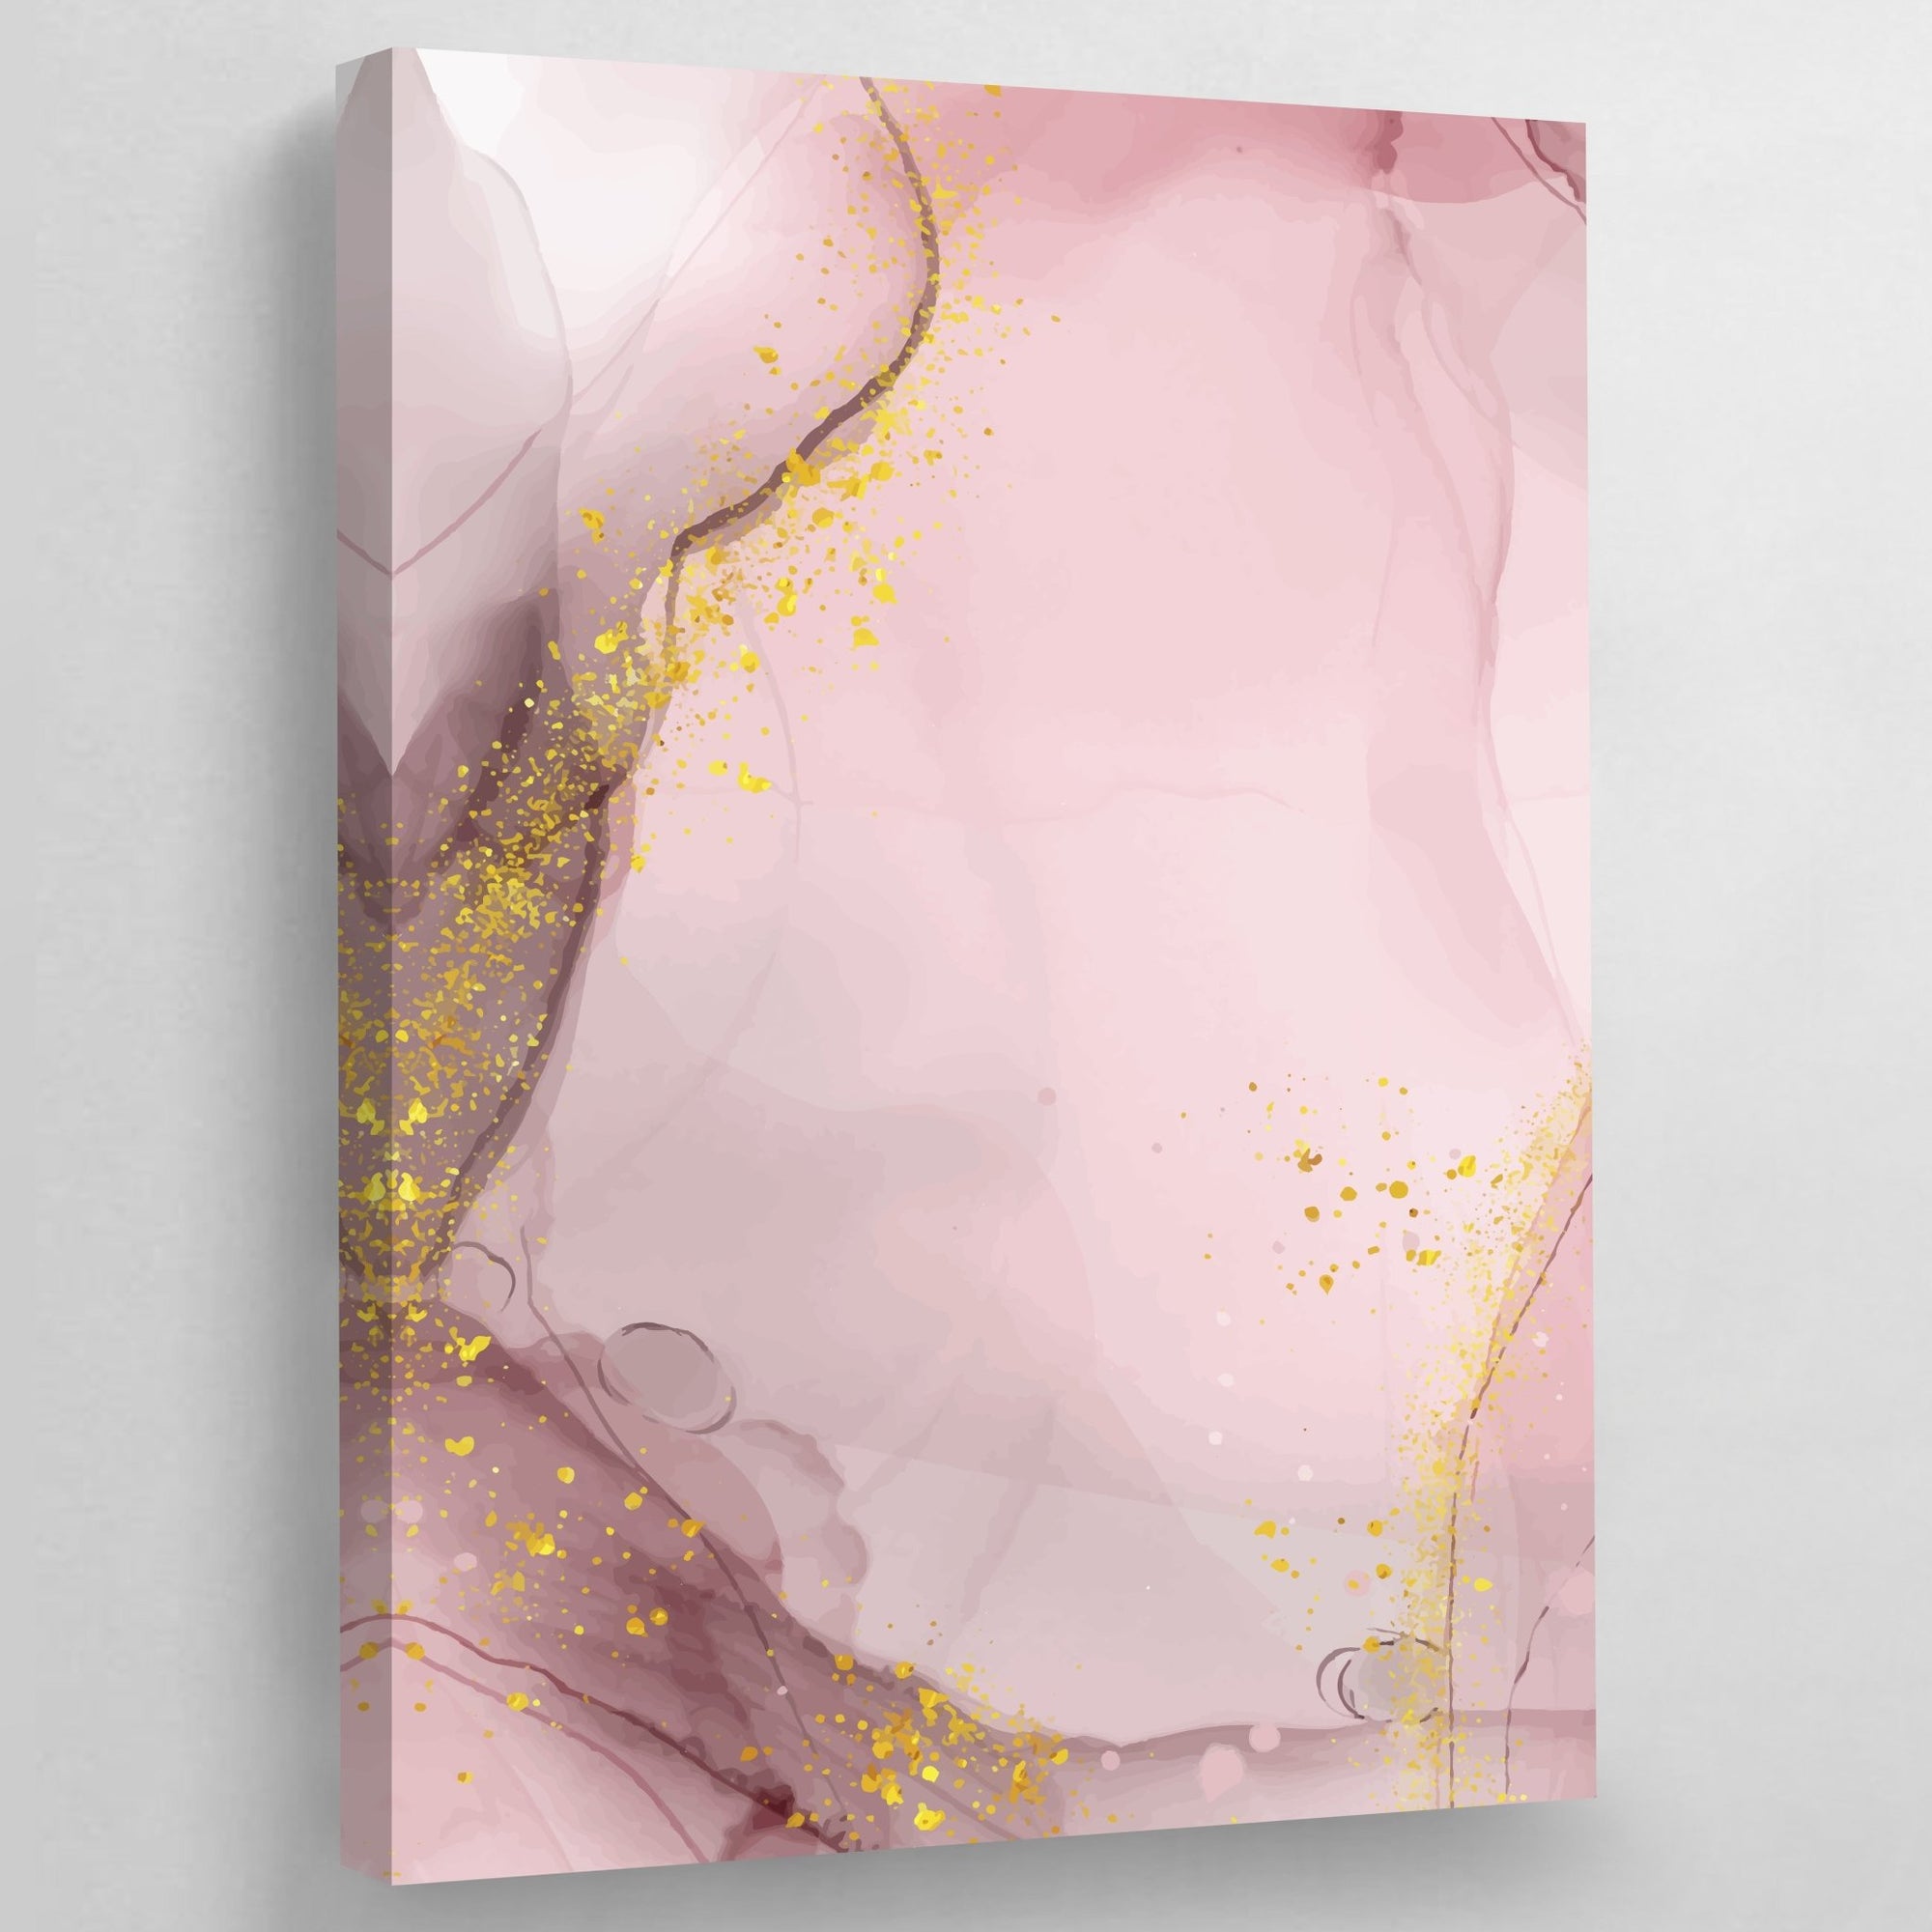 https://cdn.shopify.com/s/files/1/0589/2286/0710/products/pink-and-gold-marble-wall-art-694742_2000x.jpg?v=1673296324